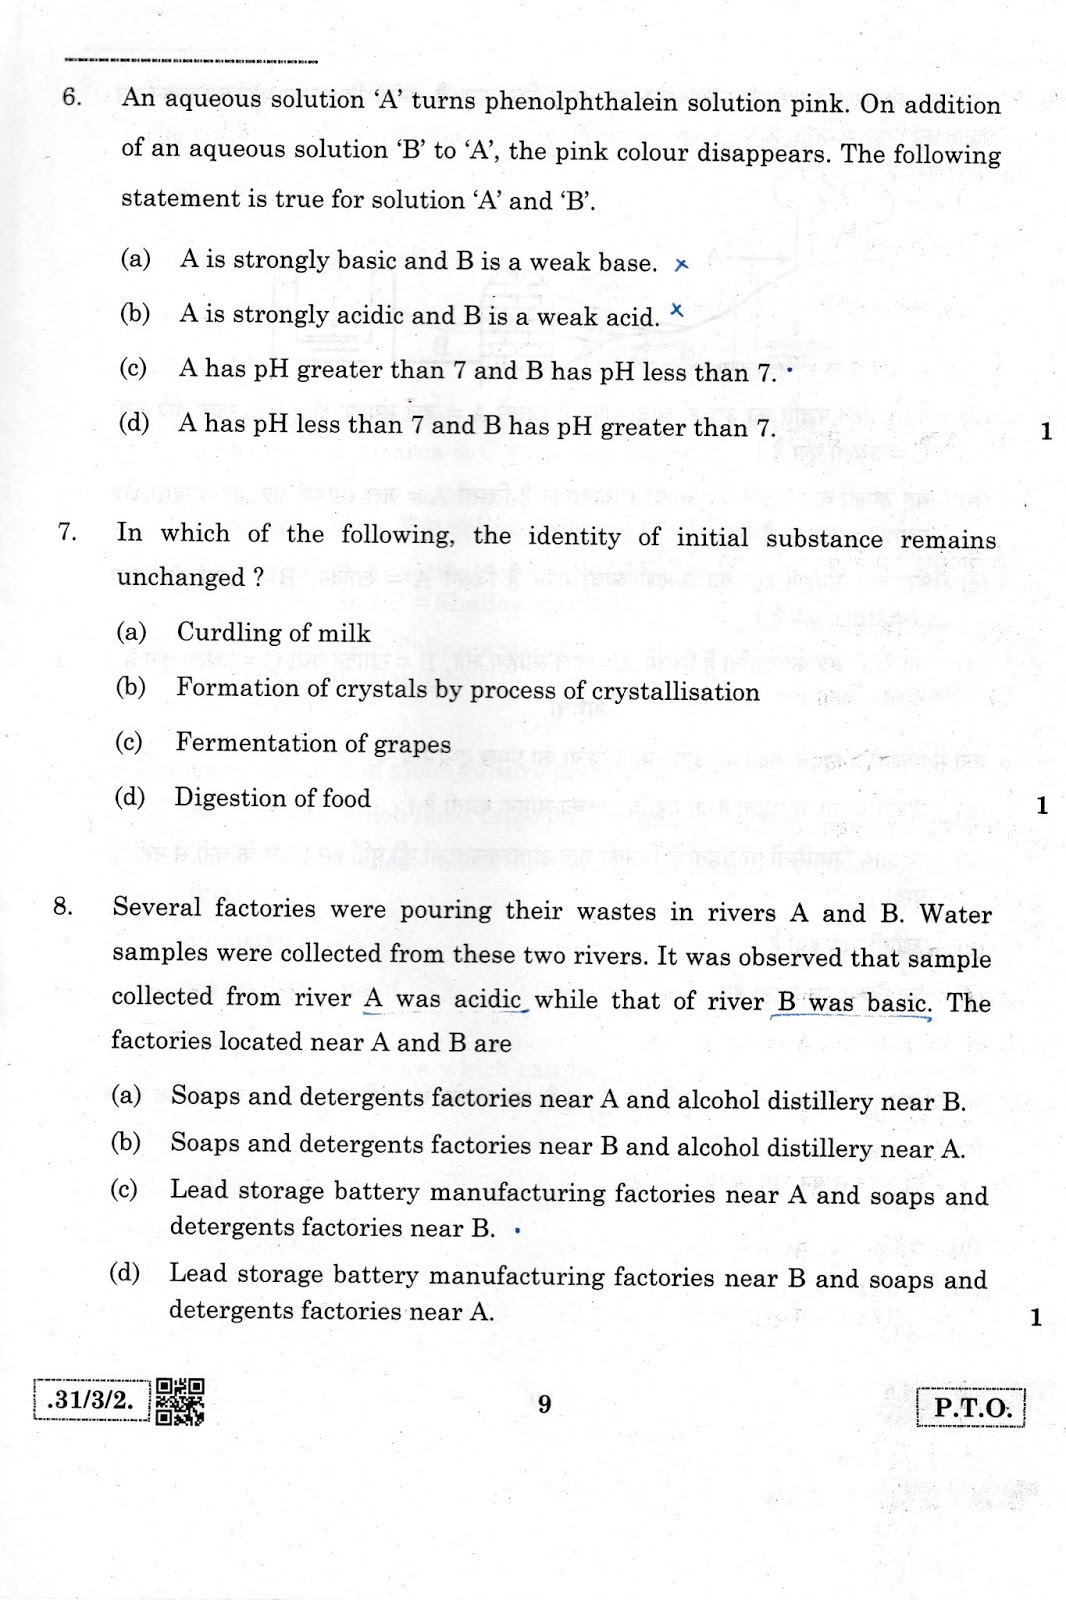 cbse class 10 science chapter 4 case study questions